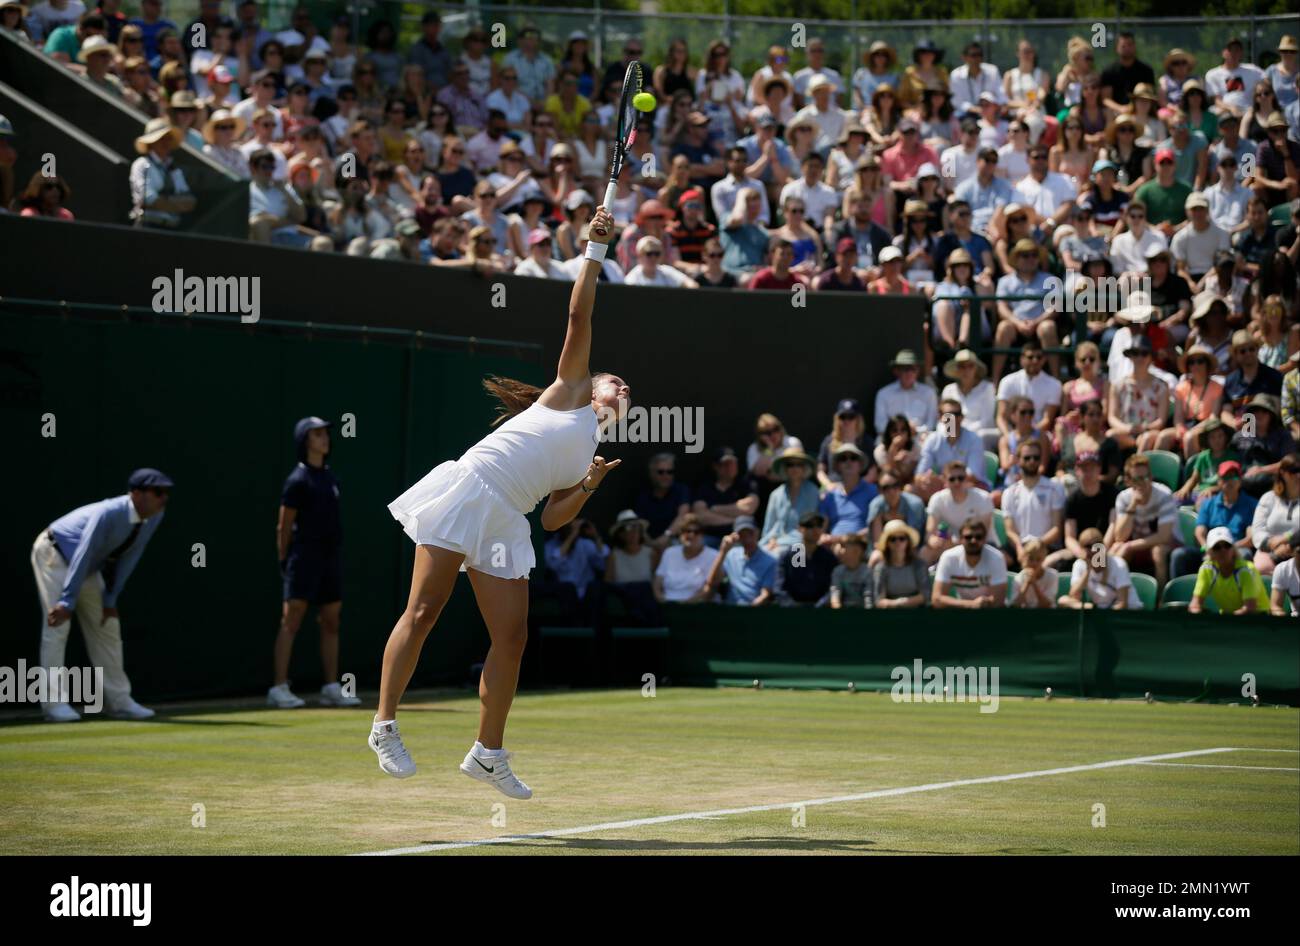 Daria Kasatkina of Russia serves to Ashleigh Barty of Australia during  their women's singles match on the sixth day at the Wimbledon Tennis  Championships in London, Saturday July 7, 2018. (AP Photo/Tim